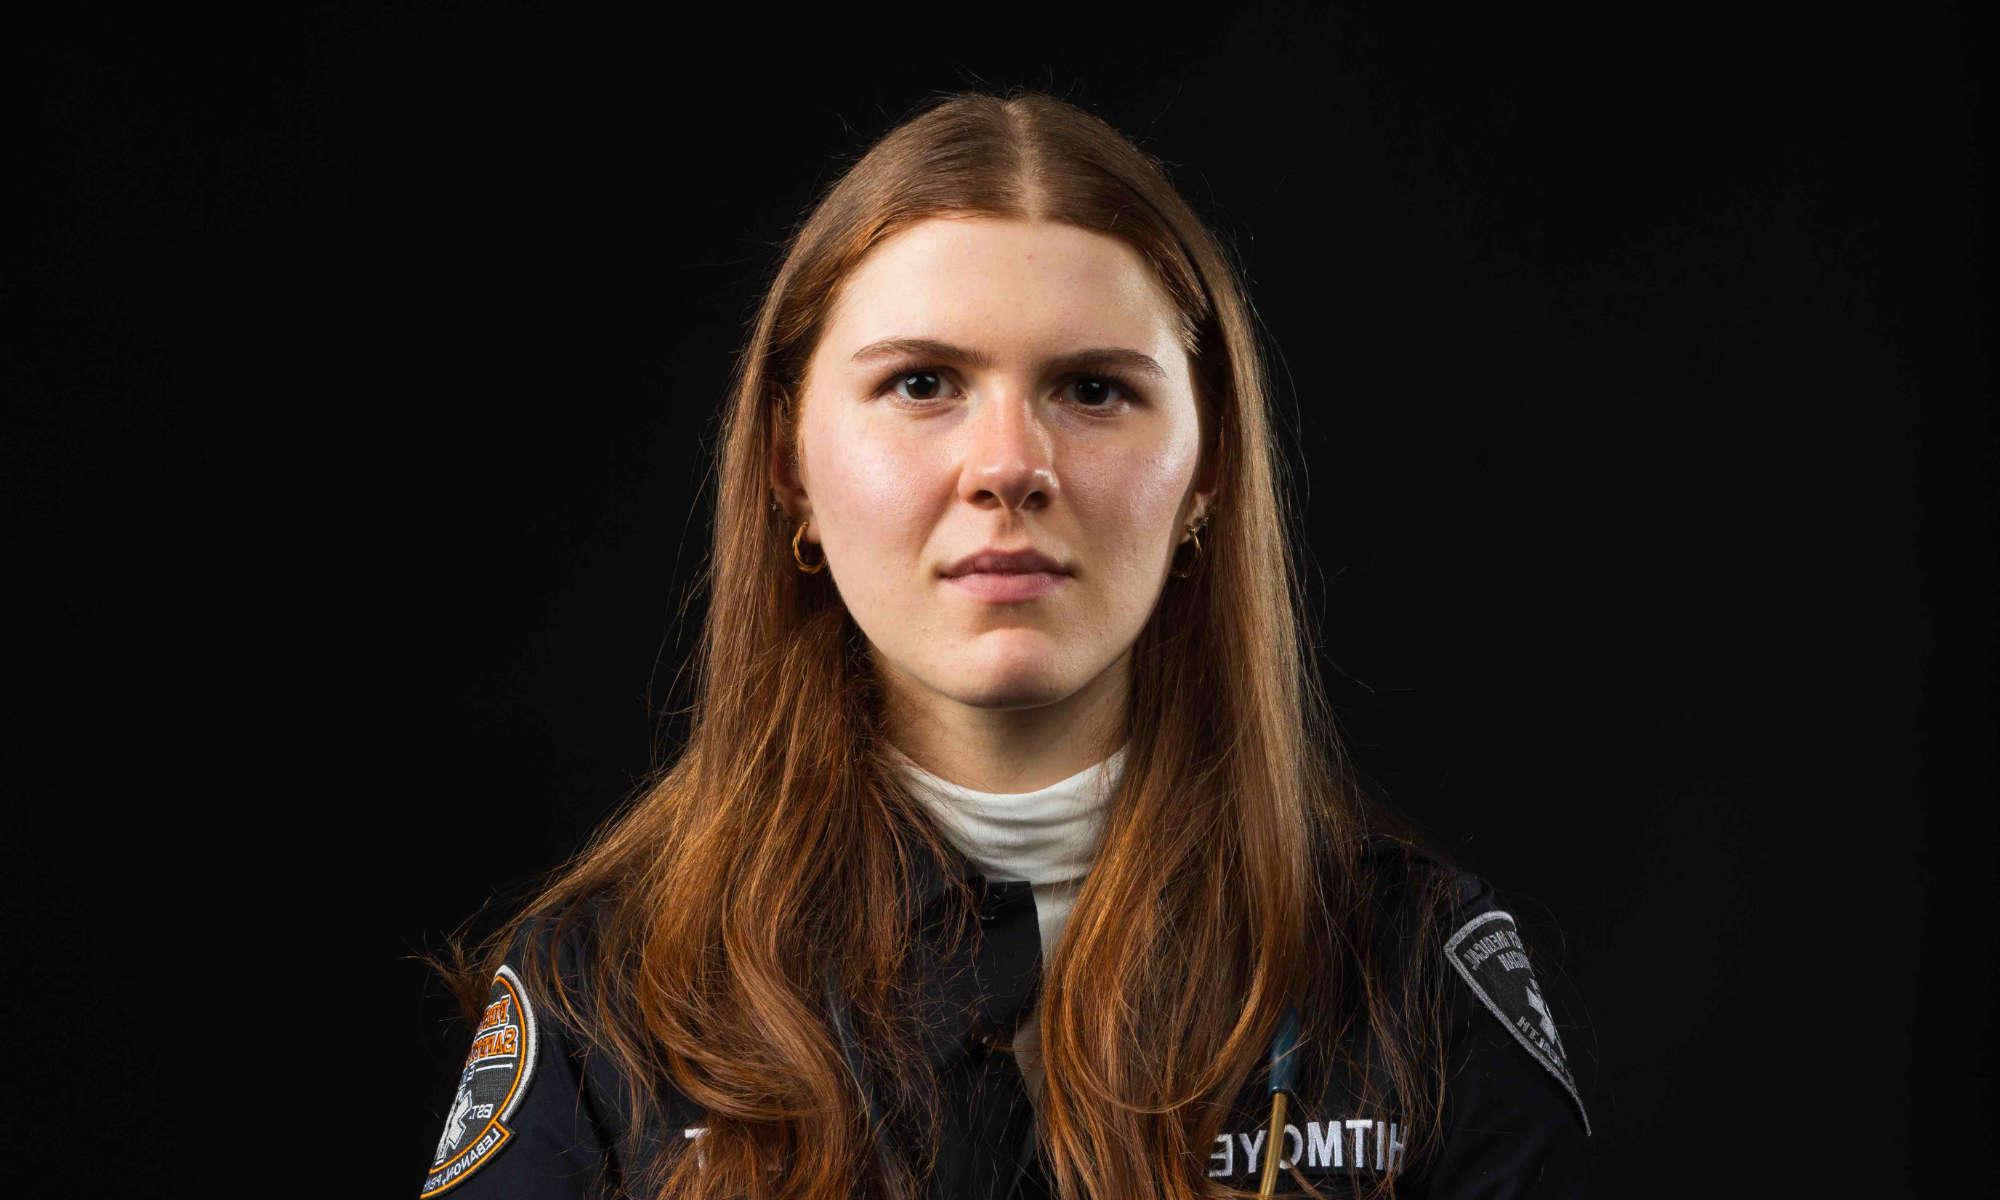 Close-up horizontal of Rachel Whitmoeyer against a black background in an EMT uniform staring at the camera.